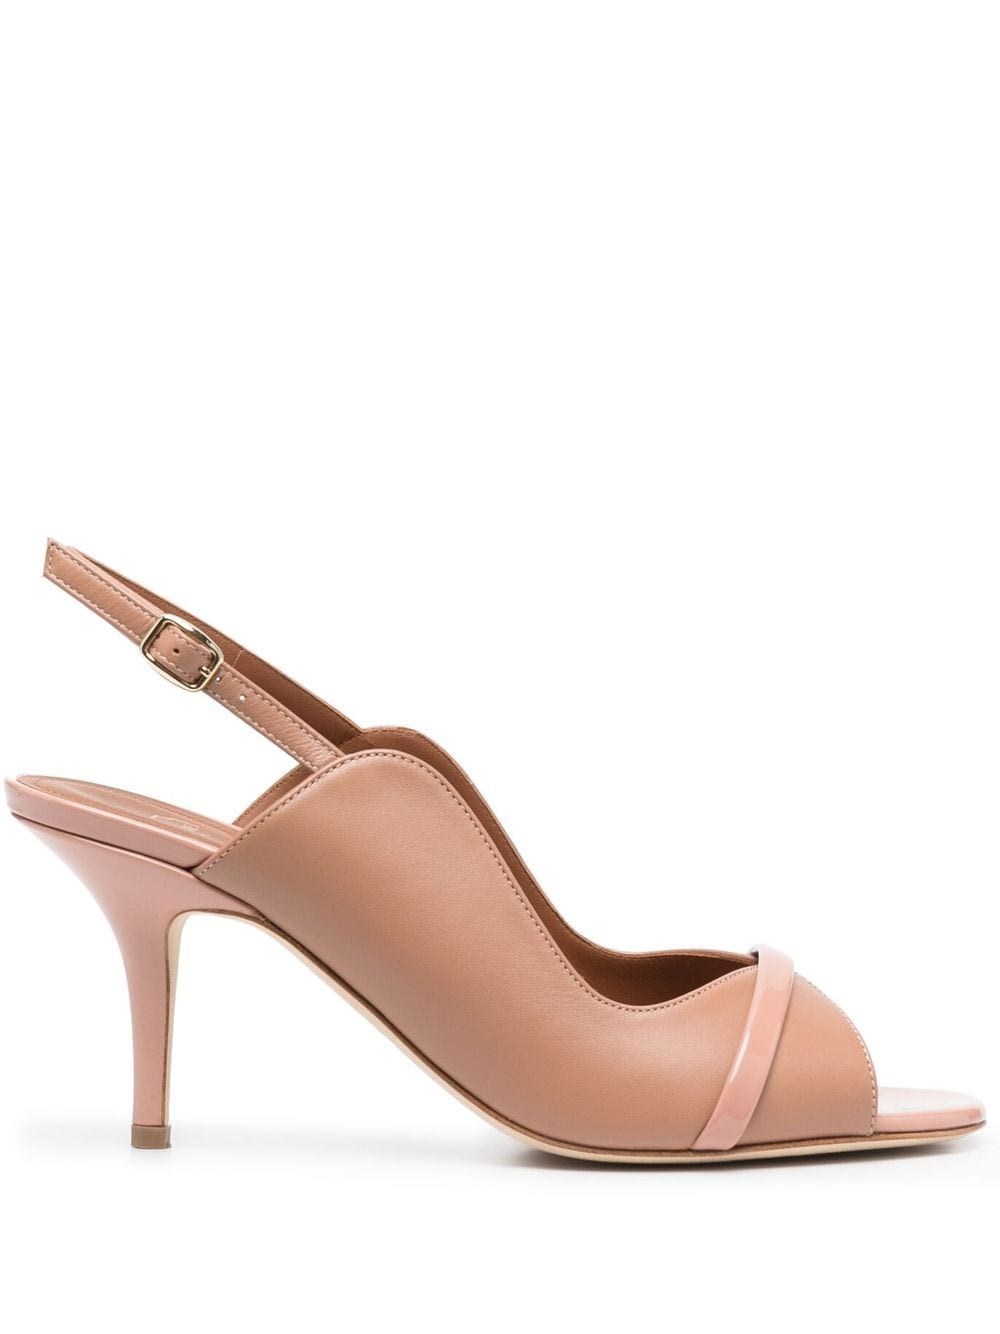 Malone Souliers Sandals In Nude & Neutrals